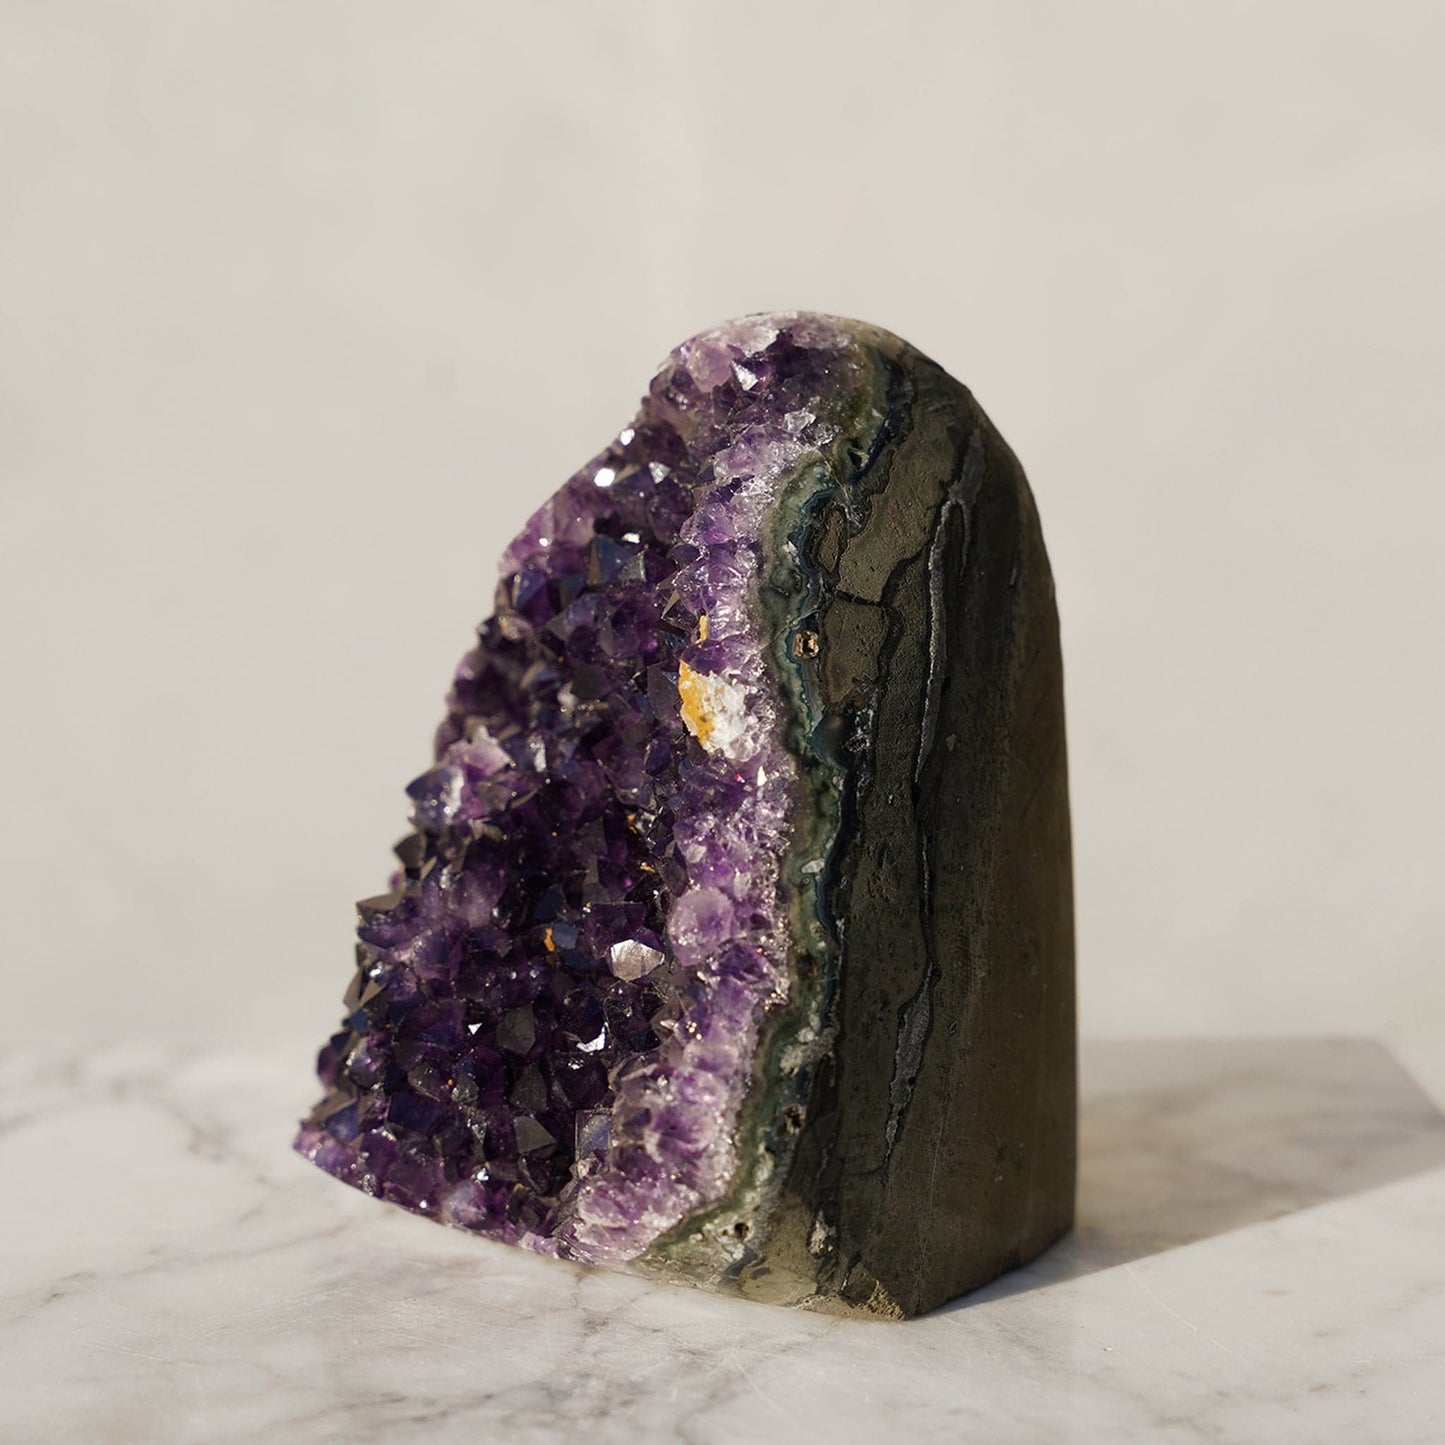 SERENE Crystal Pyramid Amethyst Geode Collection - Deepest Earth